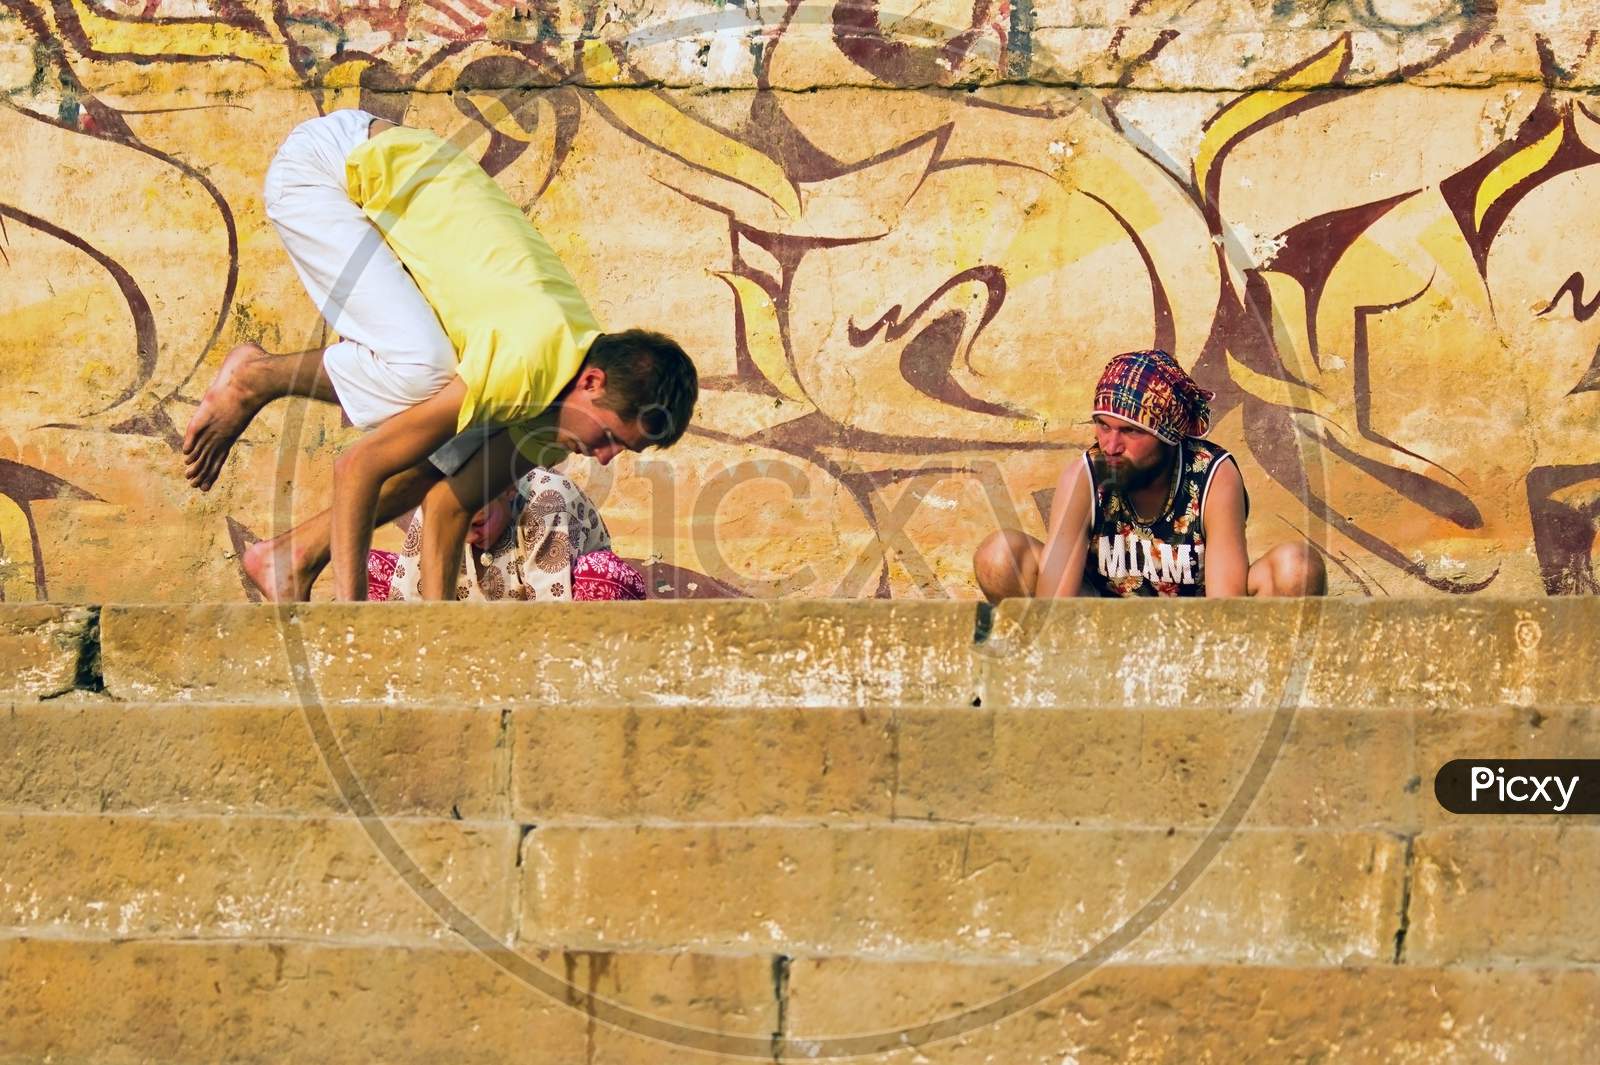 Varanasi, India - November 01, 2016: Couple Of Foreigner Men In Hipster Style Doing Yoga In The Morning With A Trainer Against Wall With Graffiti In The City Of Banaras Situated In Uttar Pradesh